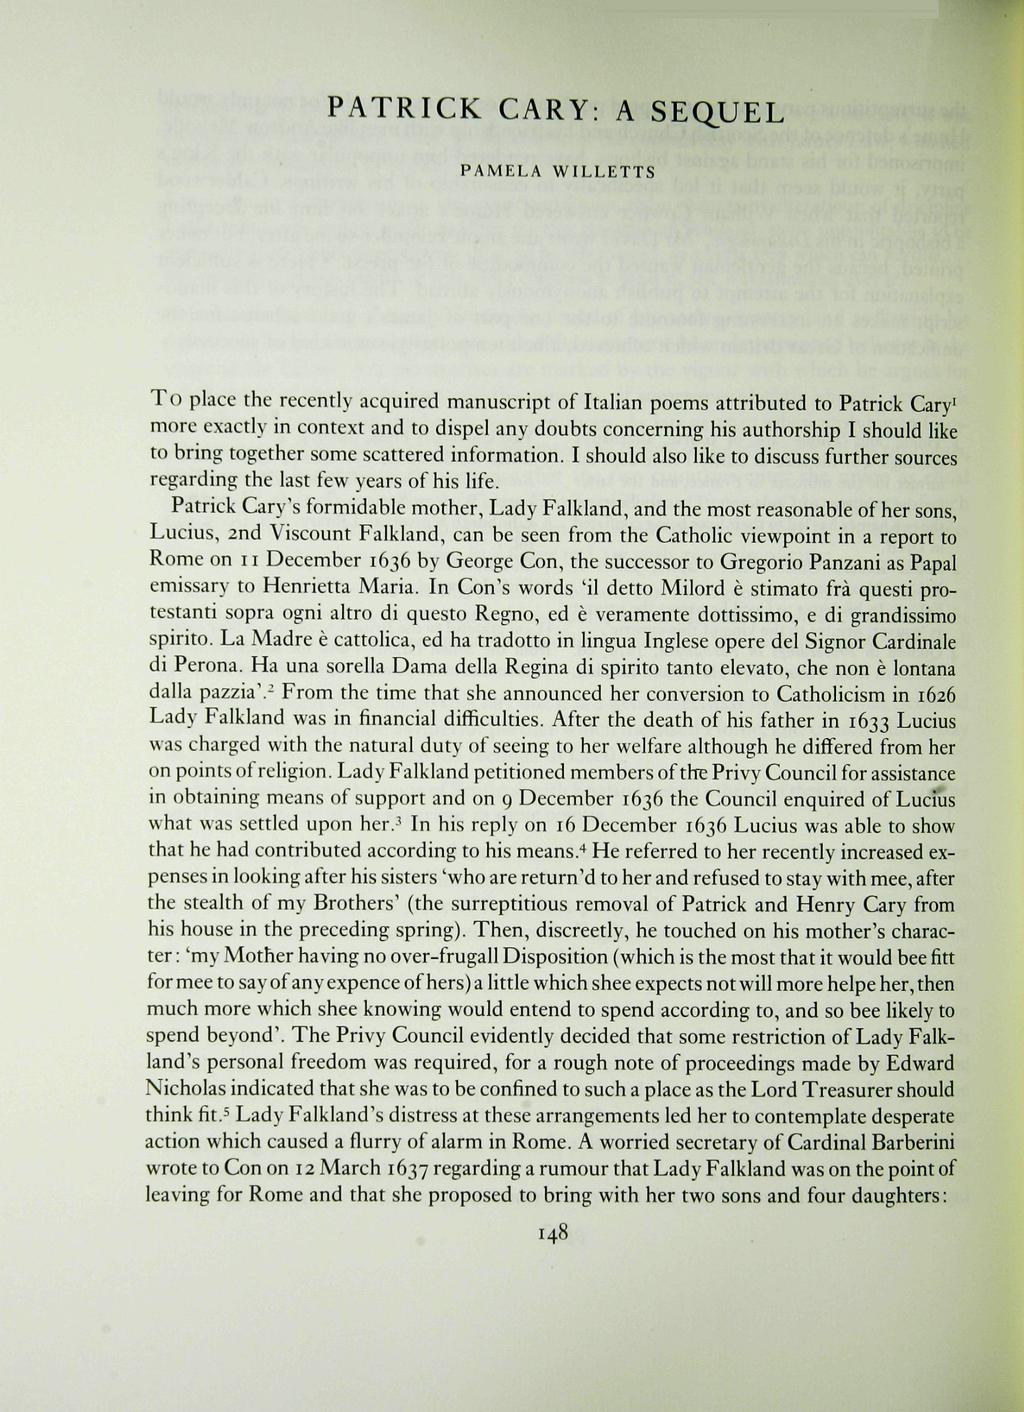 PATRICK CARY: A SEQUEL PAMELA WILLETTS To place the recently acqired manscript of Italian poems attribted to Patrick Cary' more exactly in context and to dispel any dobts concerning his athorship I